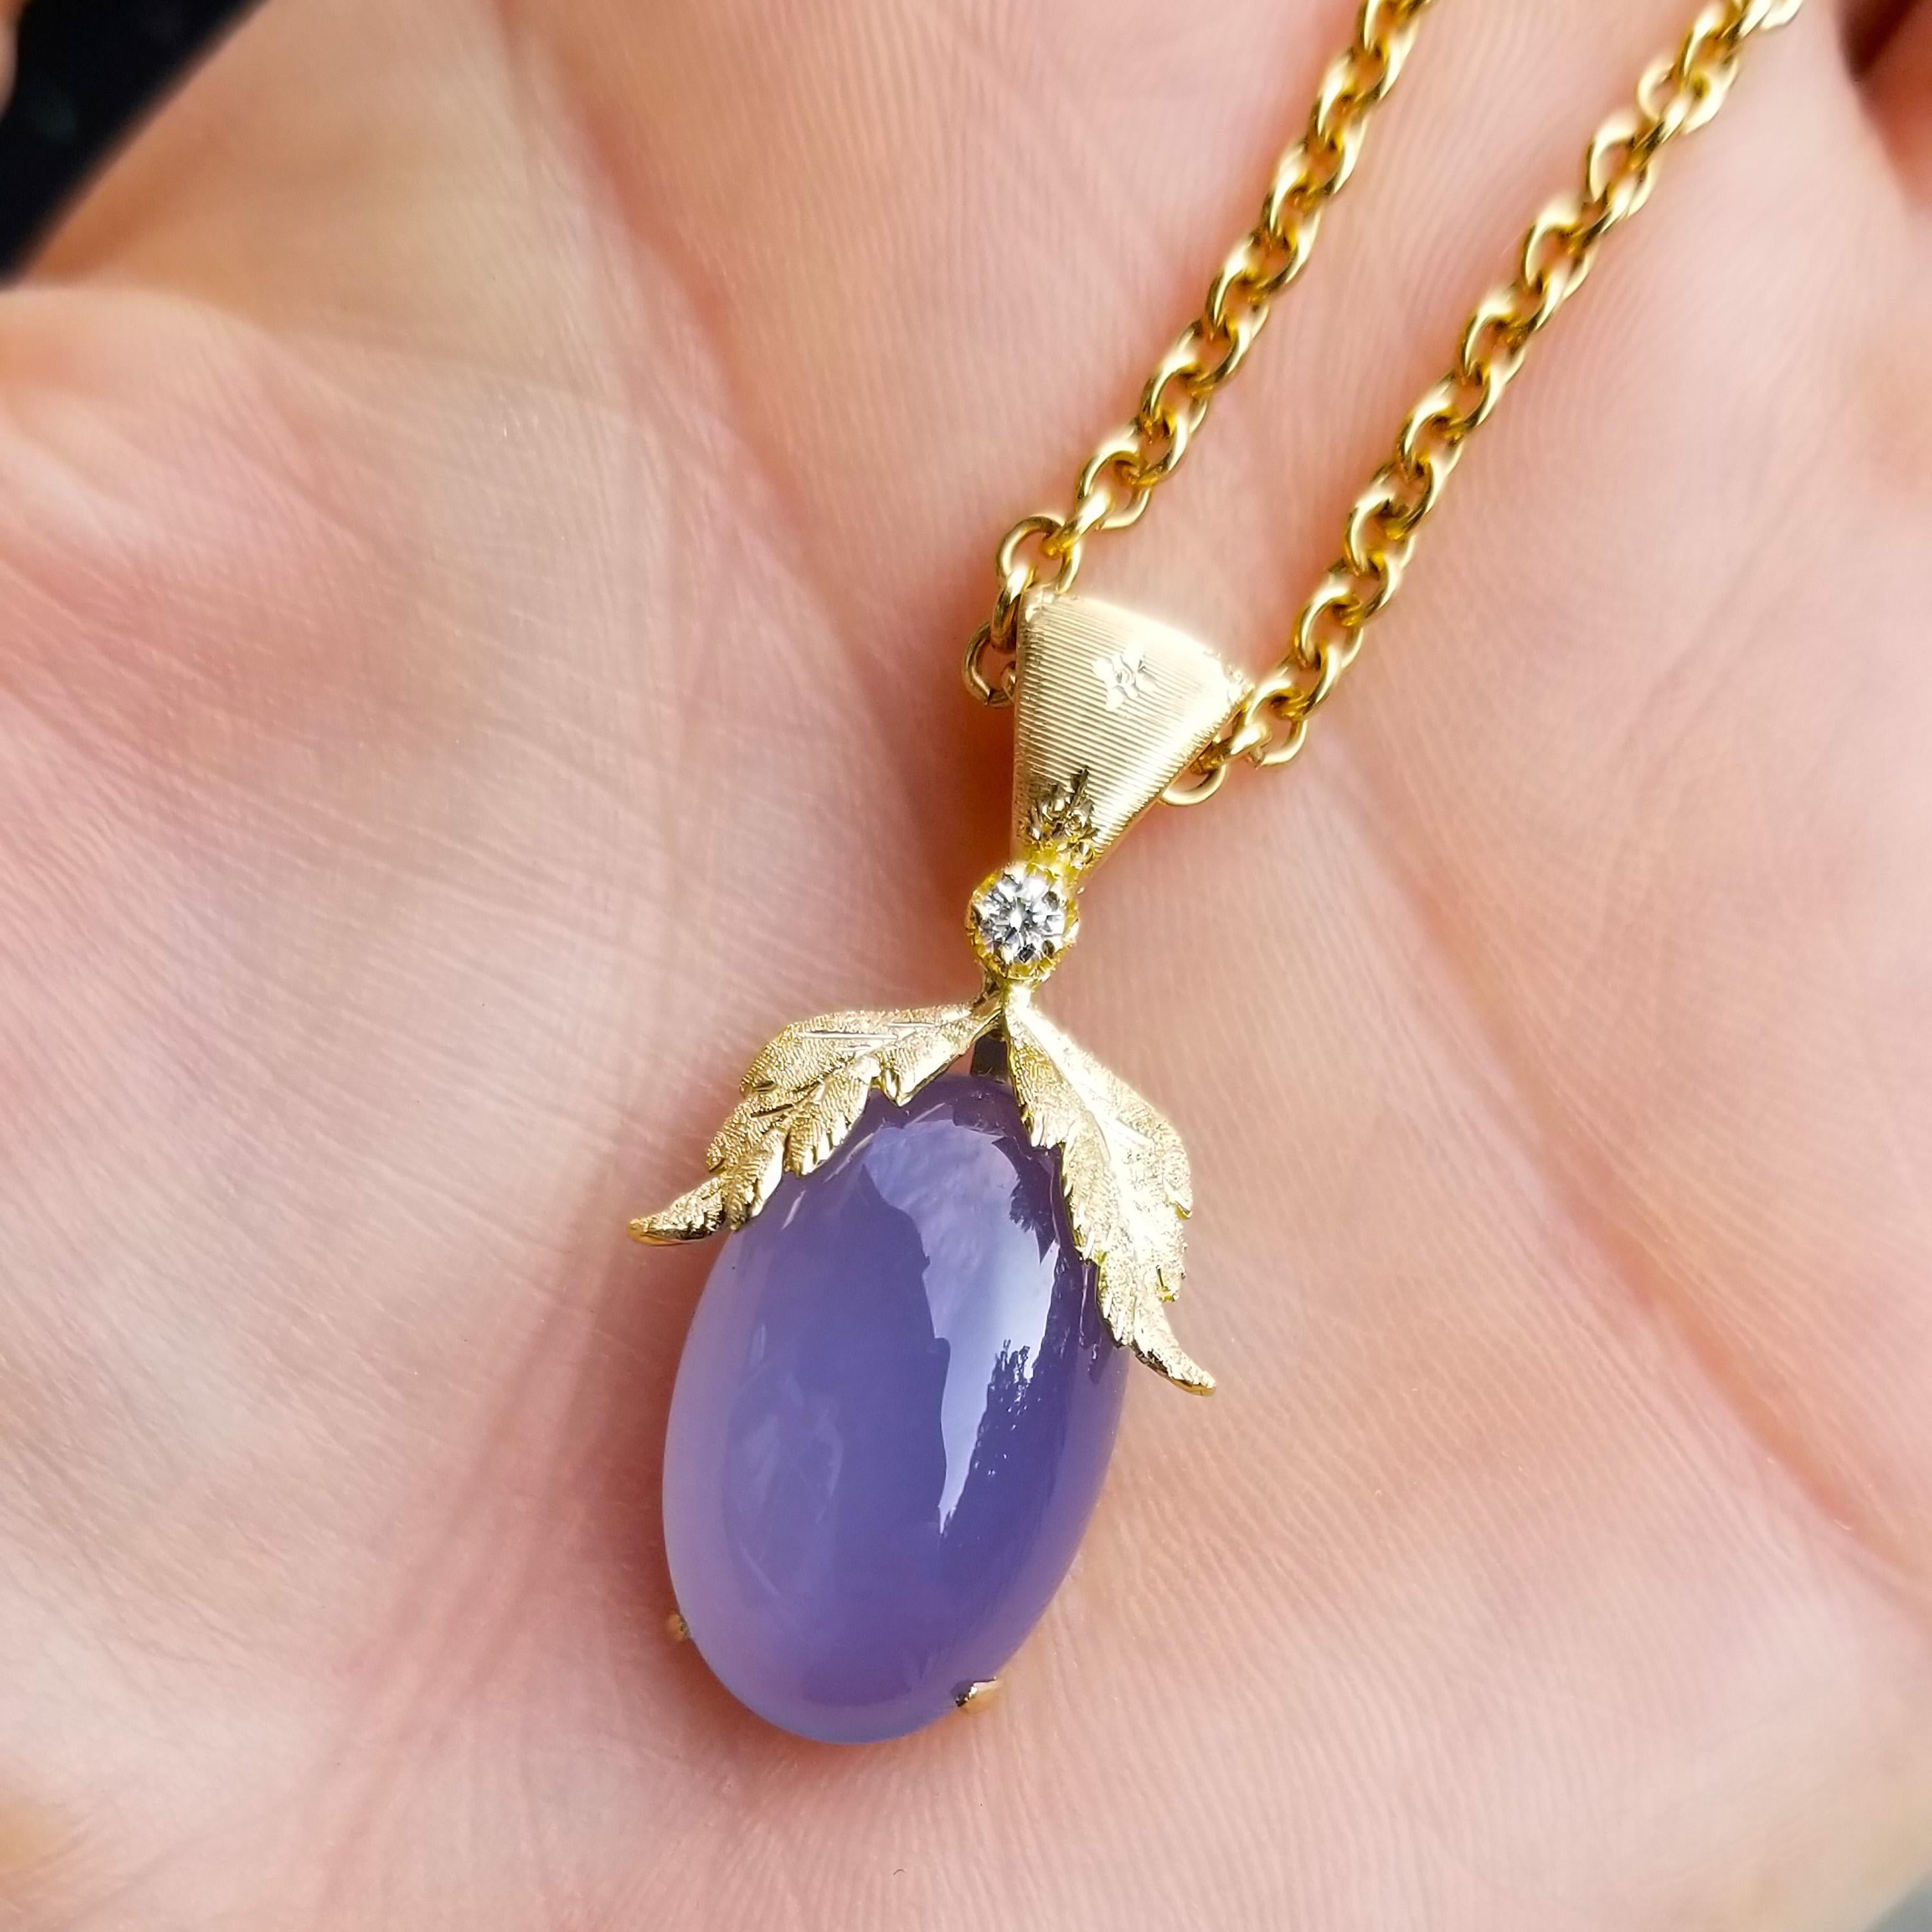 The luxuriously luminescent violet blue of this exquisite chalcedony is elegance personified.

The Sylvia pendant embraces this carefully chosen gemstone in richly detailed, Florentine engraved 18kt gold leaves. This pendant was masterfully crafted